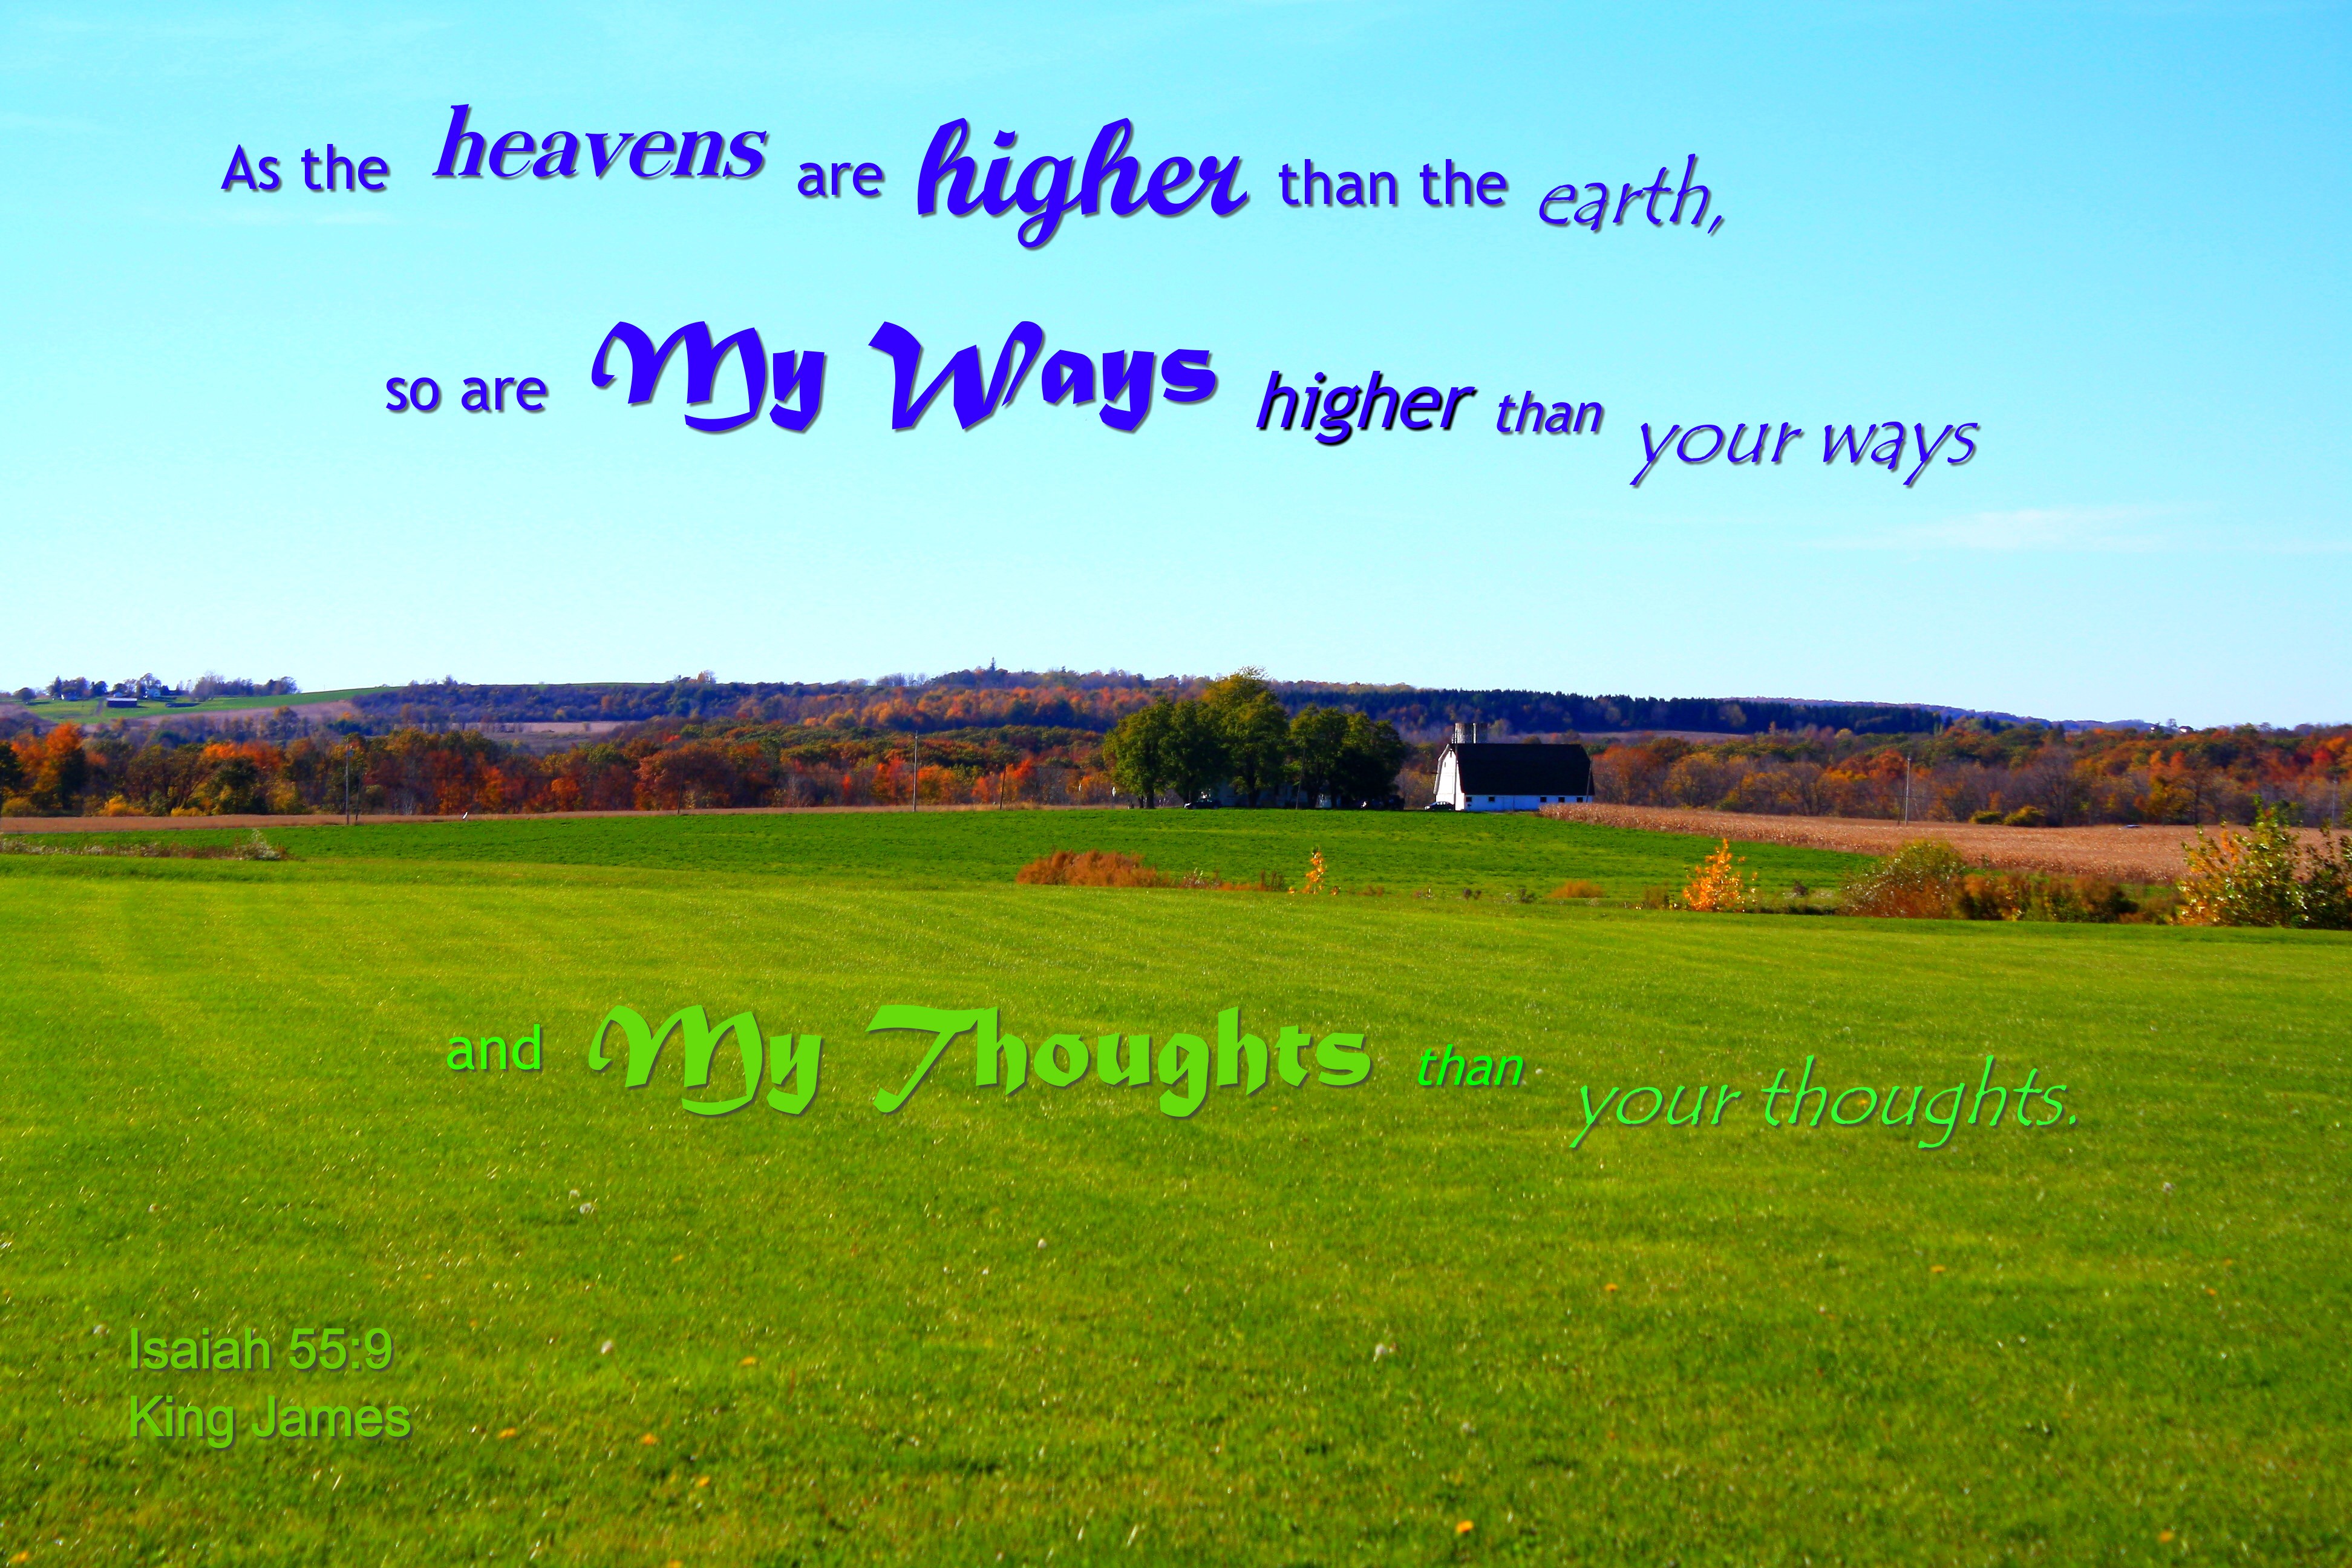 God's ways-thoughts higher photo